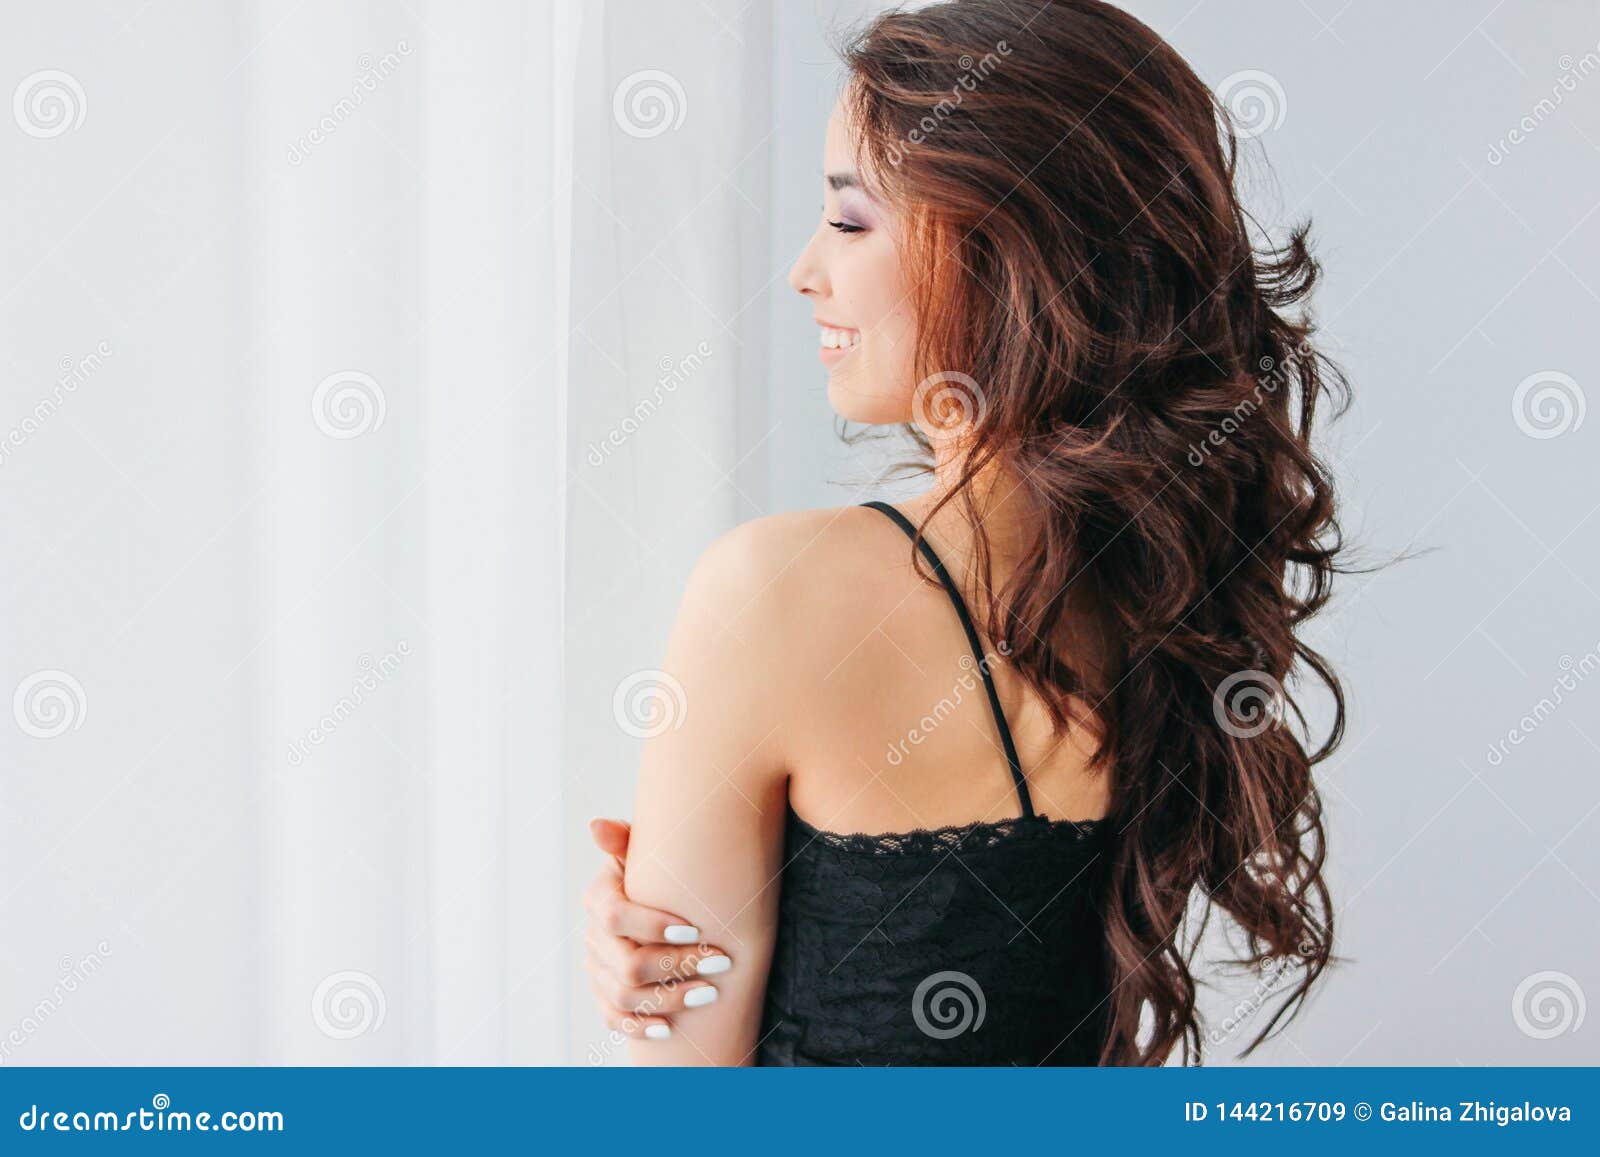 Sensual Smiling Girl Asian Young Woman With Dark Long Curly